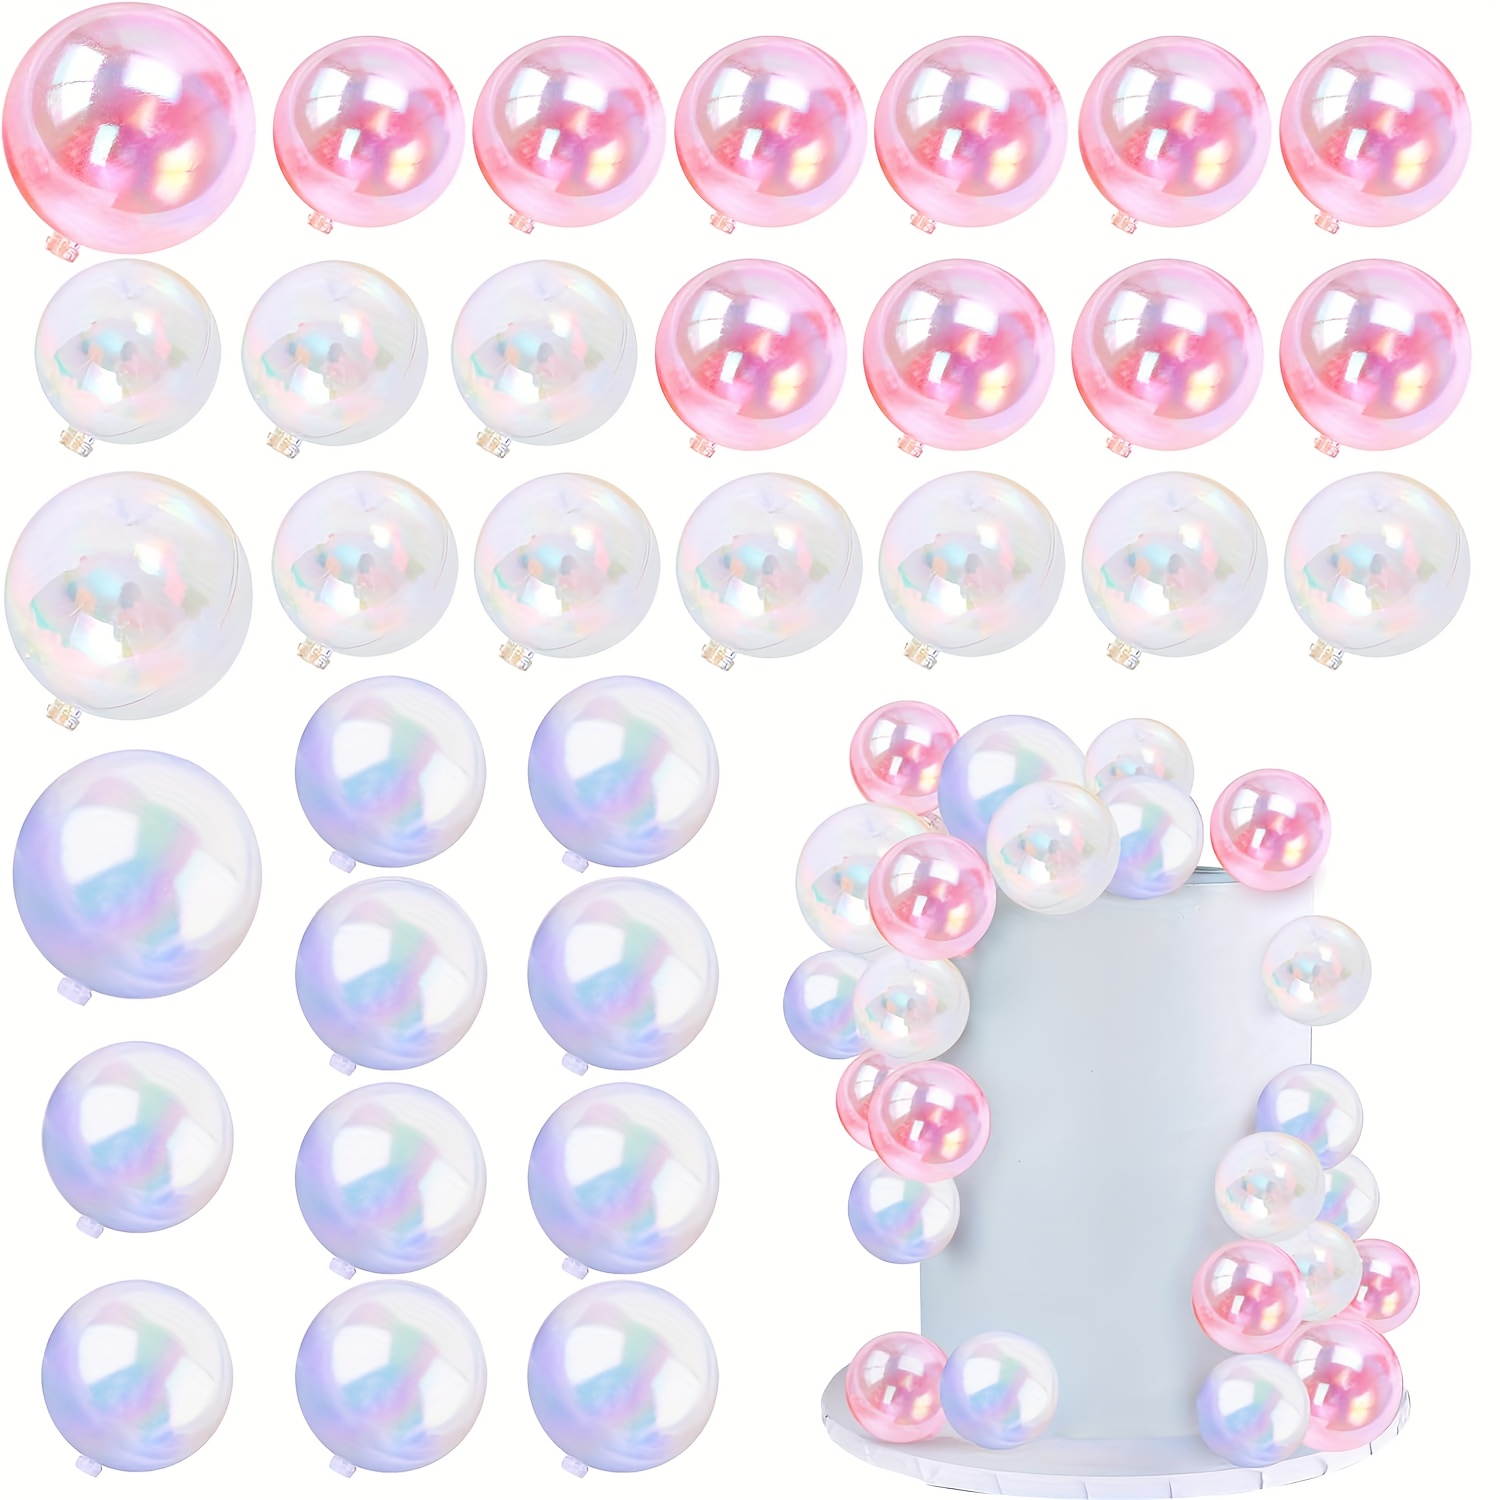 

36 Pcs Bubble Balloon Cake Toppers – Non-electric Pearl Cake Decoration Supplies For Birthday, Wedding, Anniversary, Graduation – Versatile Party Toppers For Christmas, Halloween, Thanksgiving